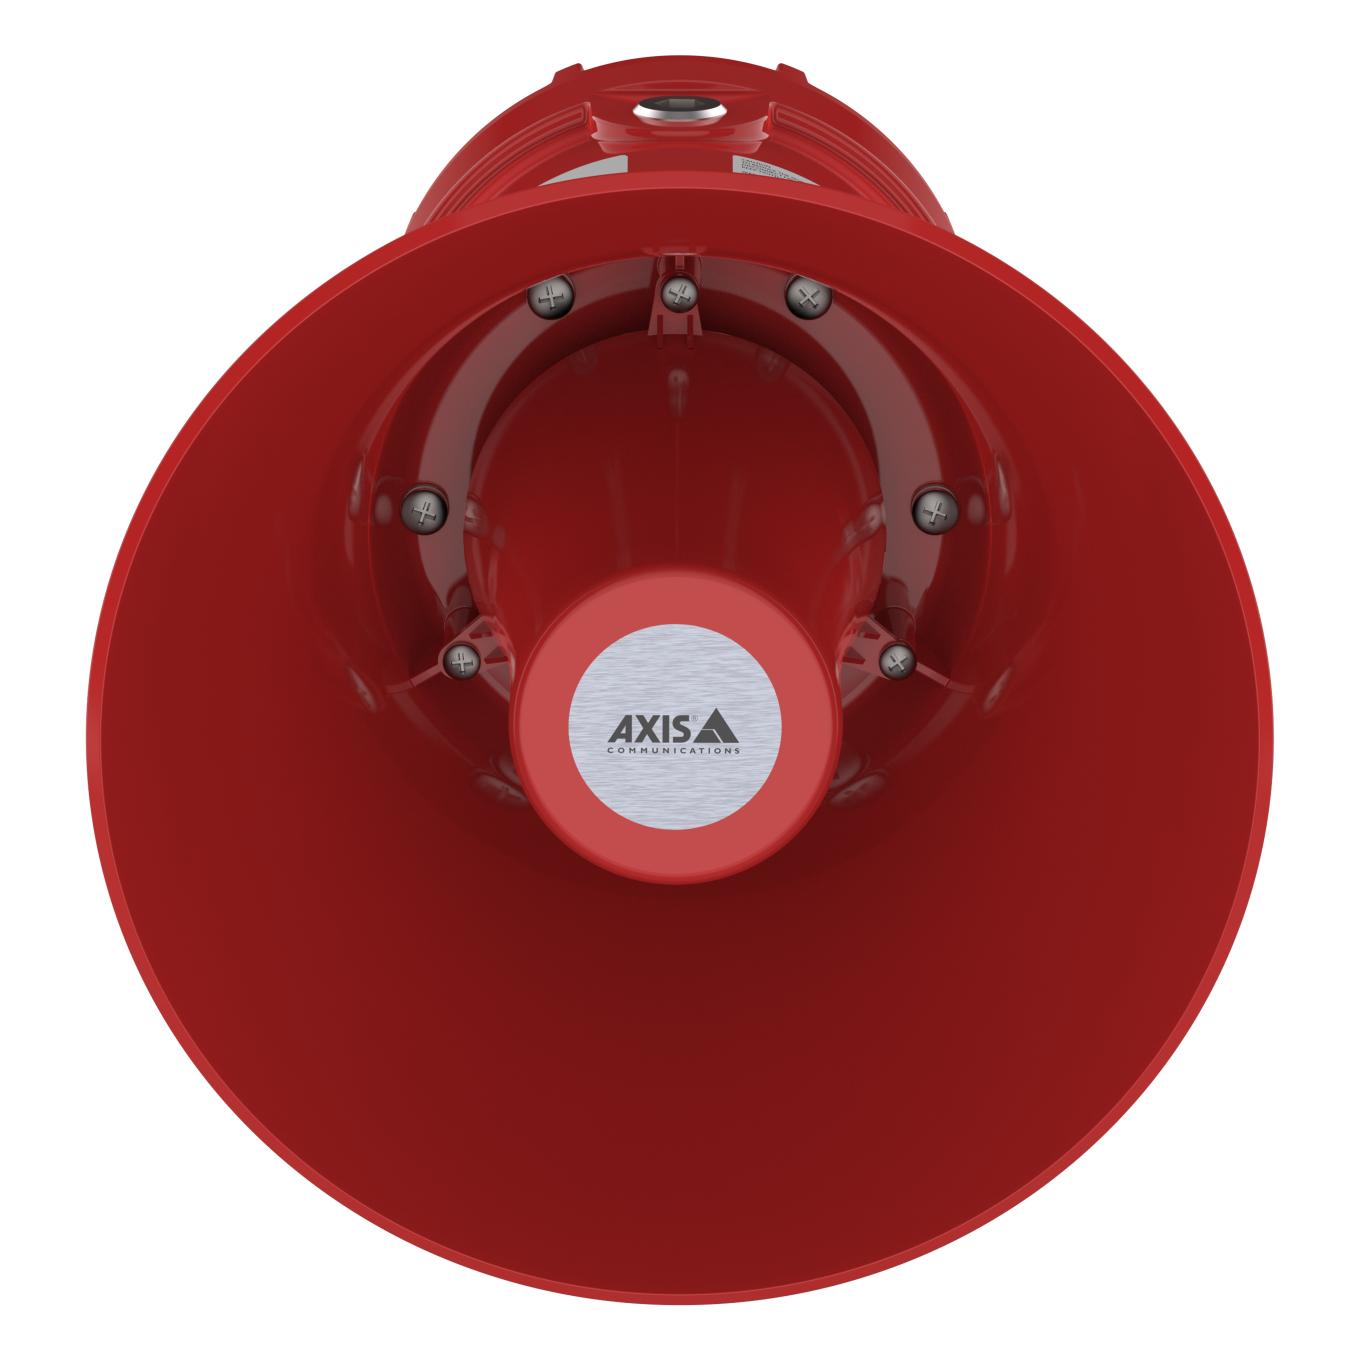 AXIS XC1311 Explosion-Protected Network Horn Speaker viewed from its front angle